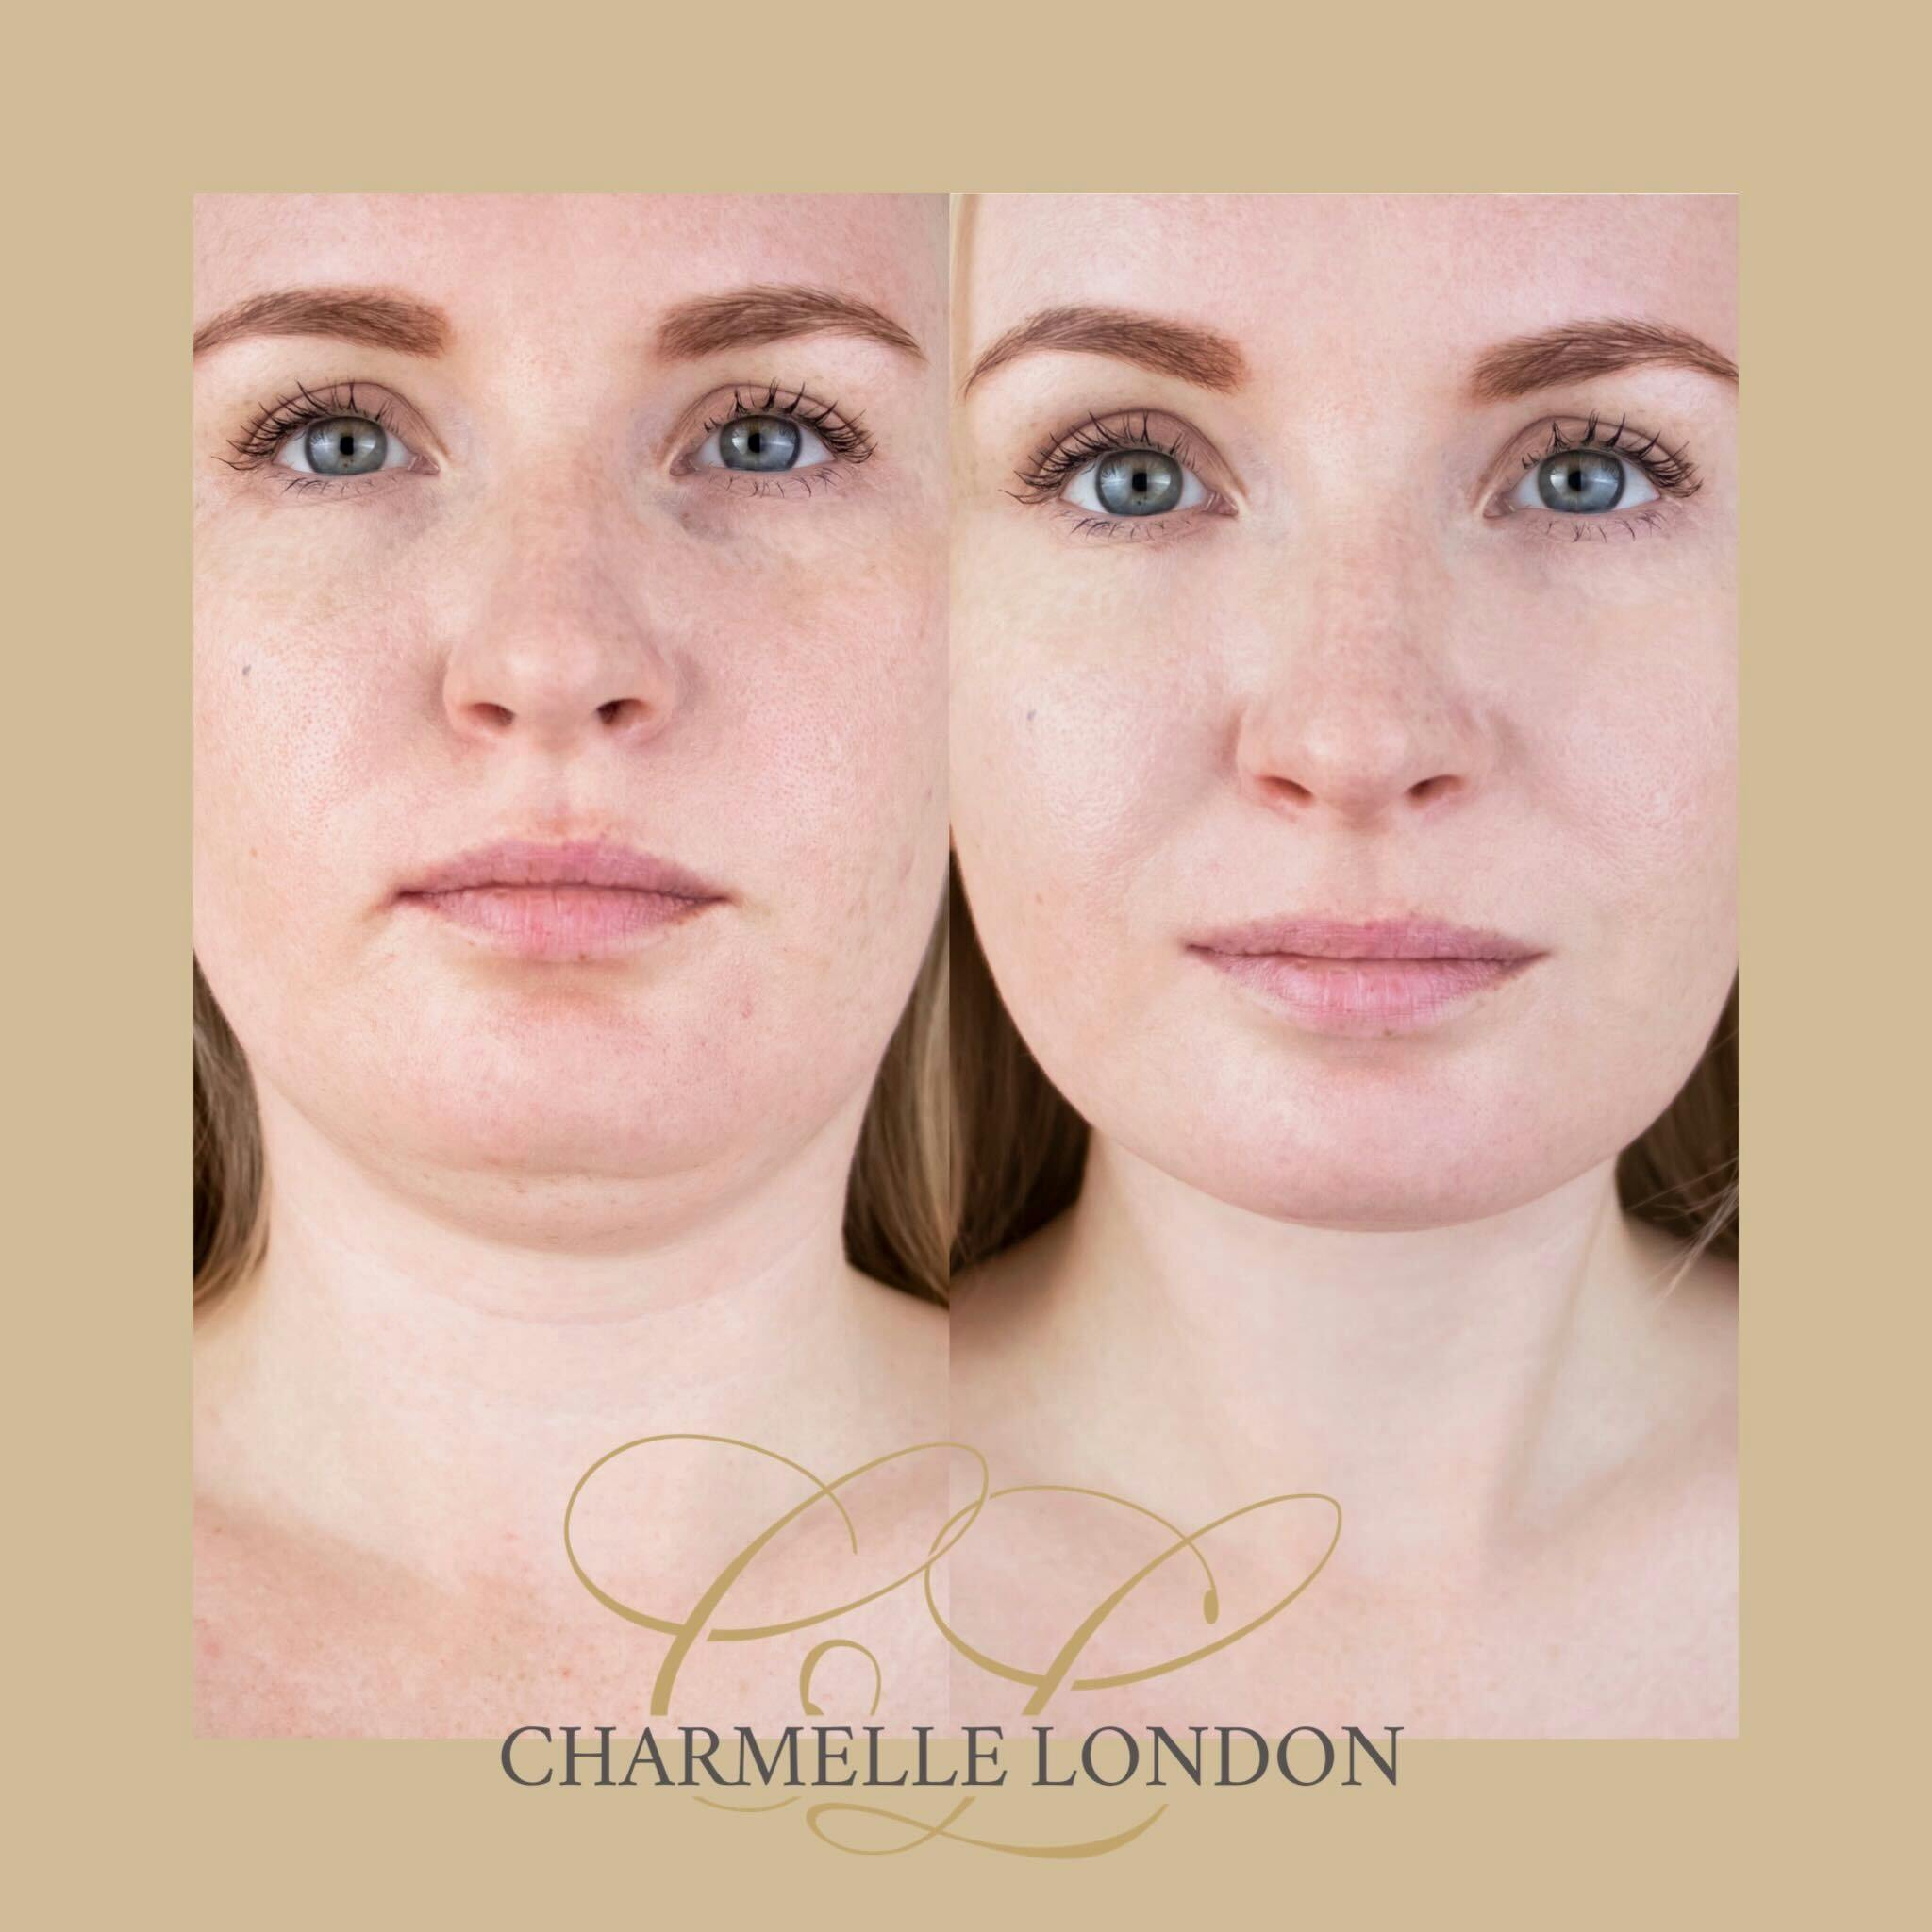 Aqualyx Fat Dissolving Experience effective, non-surgical fat removal with Aqualyx Fat Dissolving Injections at Charmelle London. Target stubborn fat in problem areas and achieve a more contoured and defined look. Book your consultation today.